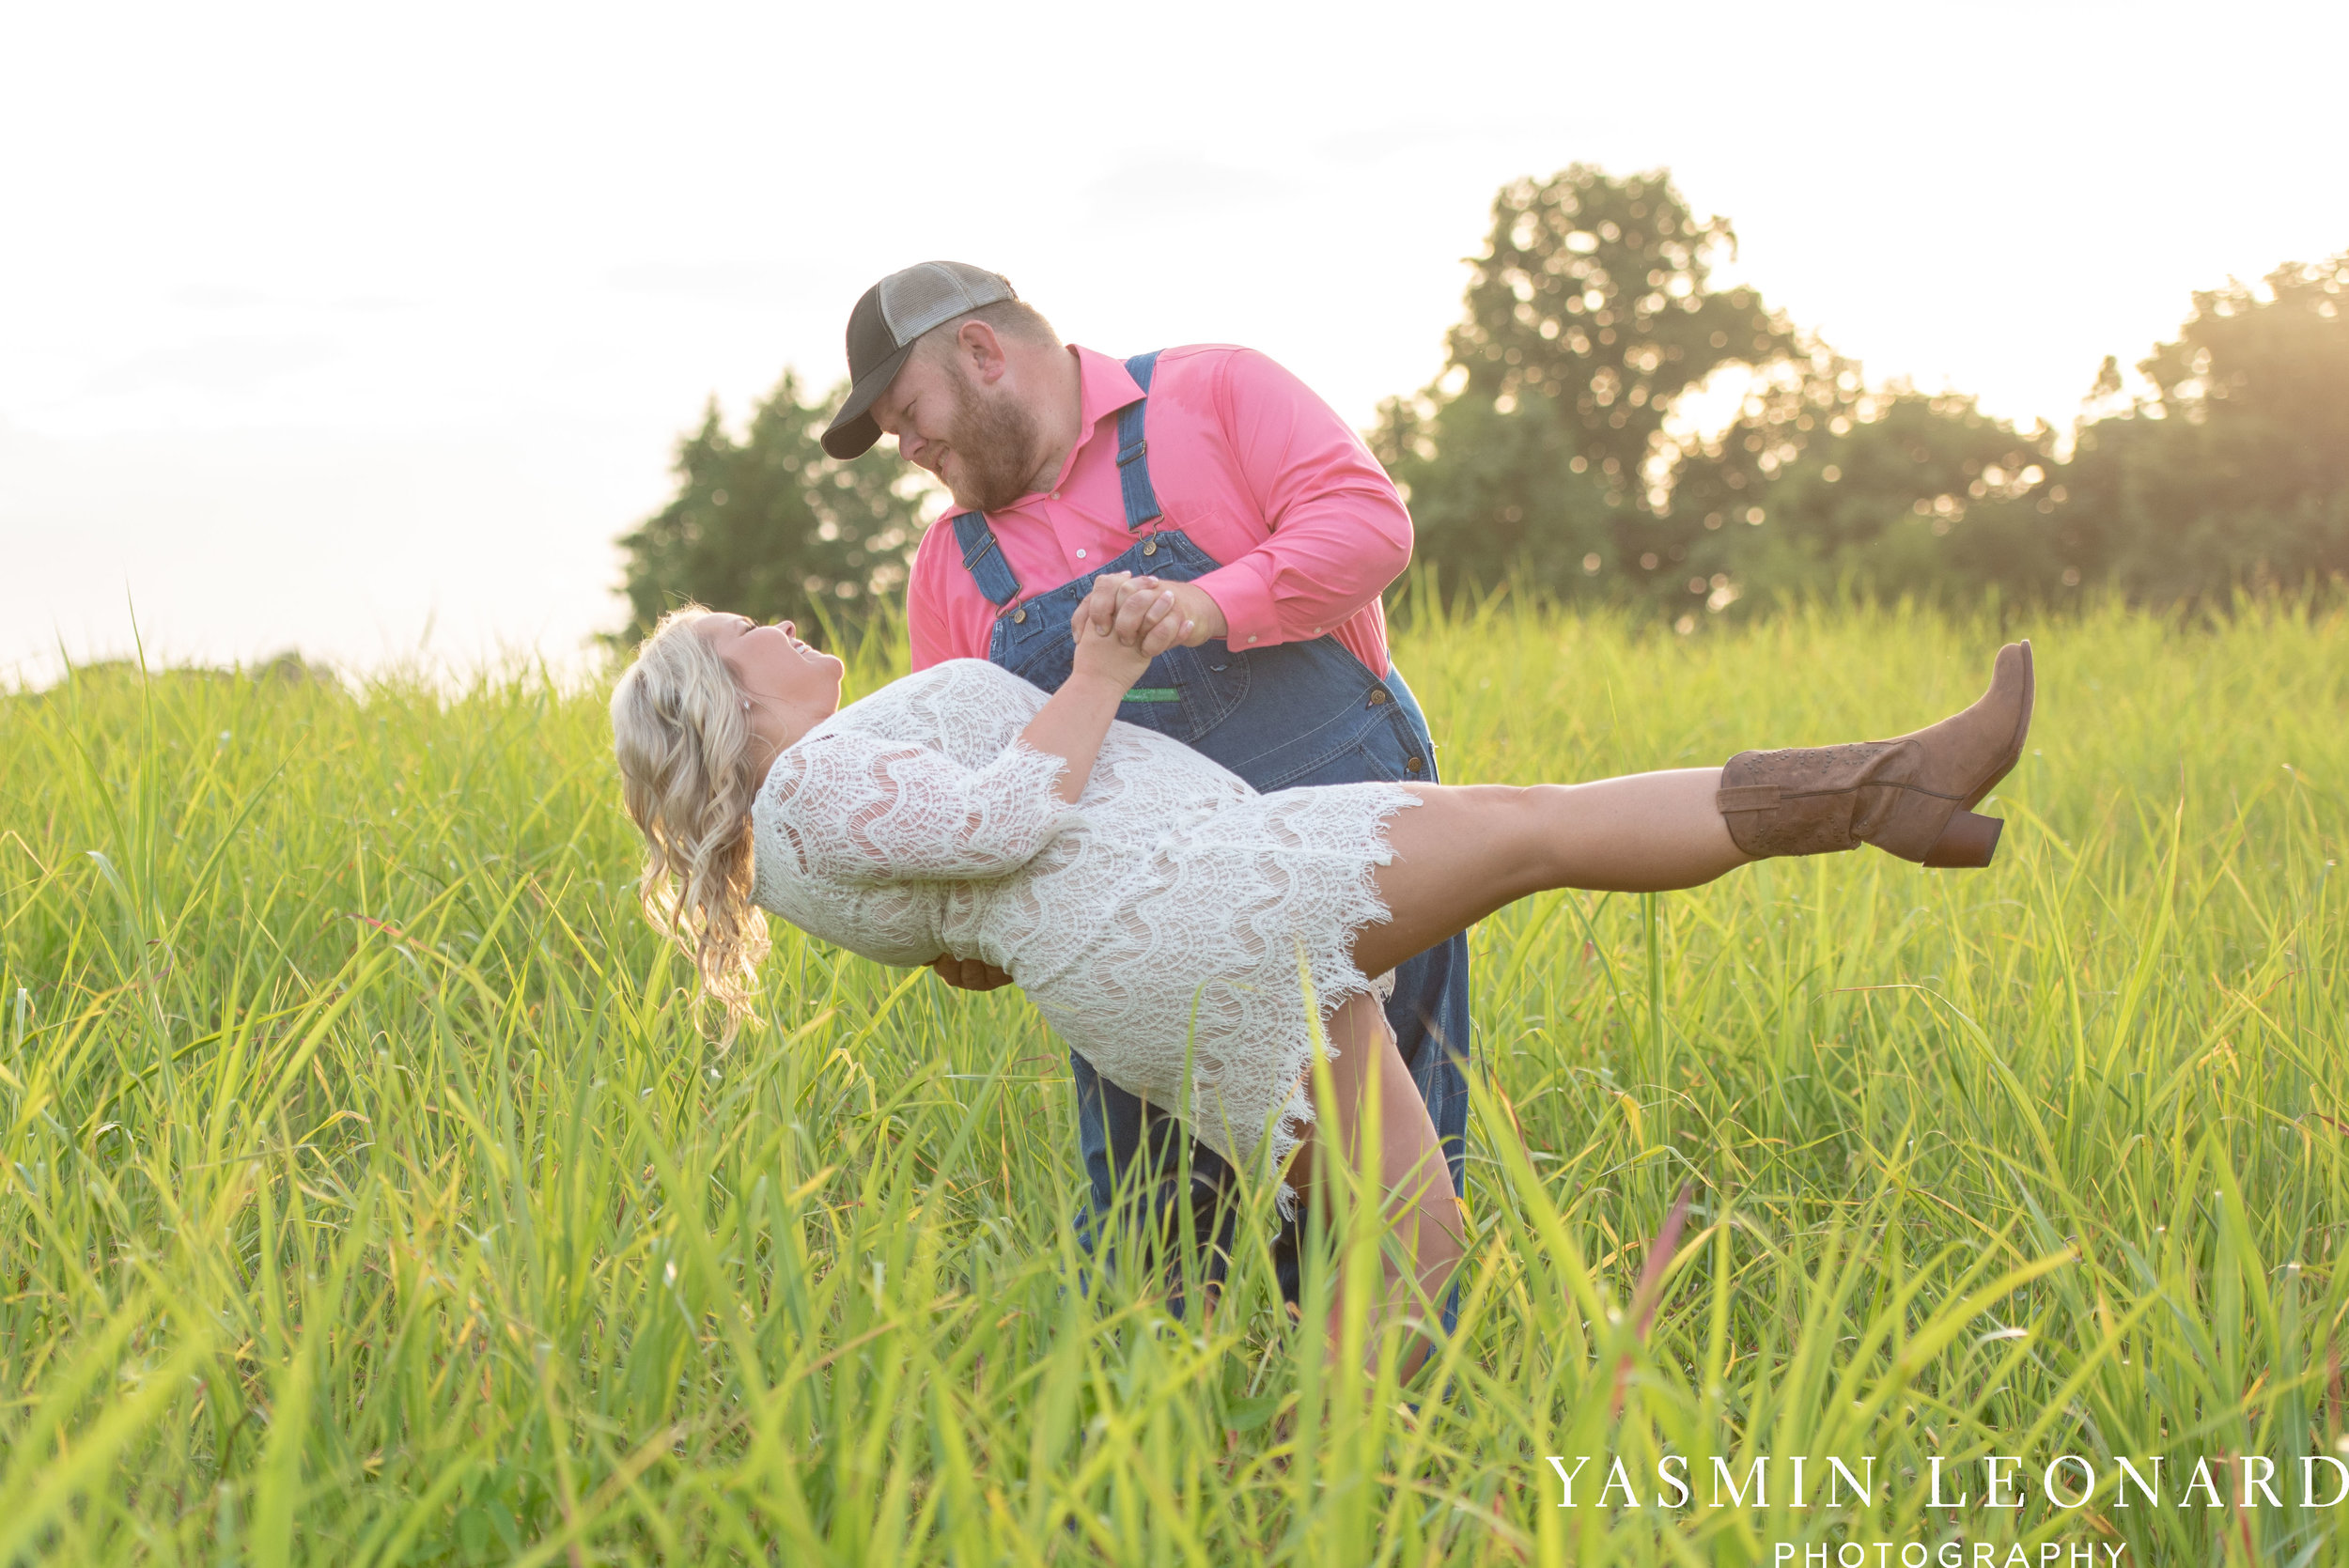 NC Engaged - Wallburg Engagement - Country Engagement Session - Barn Engagement Session - Outdoor Engagement Session - Farmer Engagement Session - Engagement Session with Overalls and Boots-10.jpg